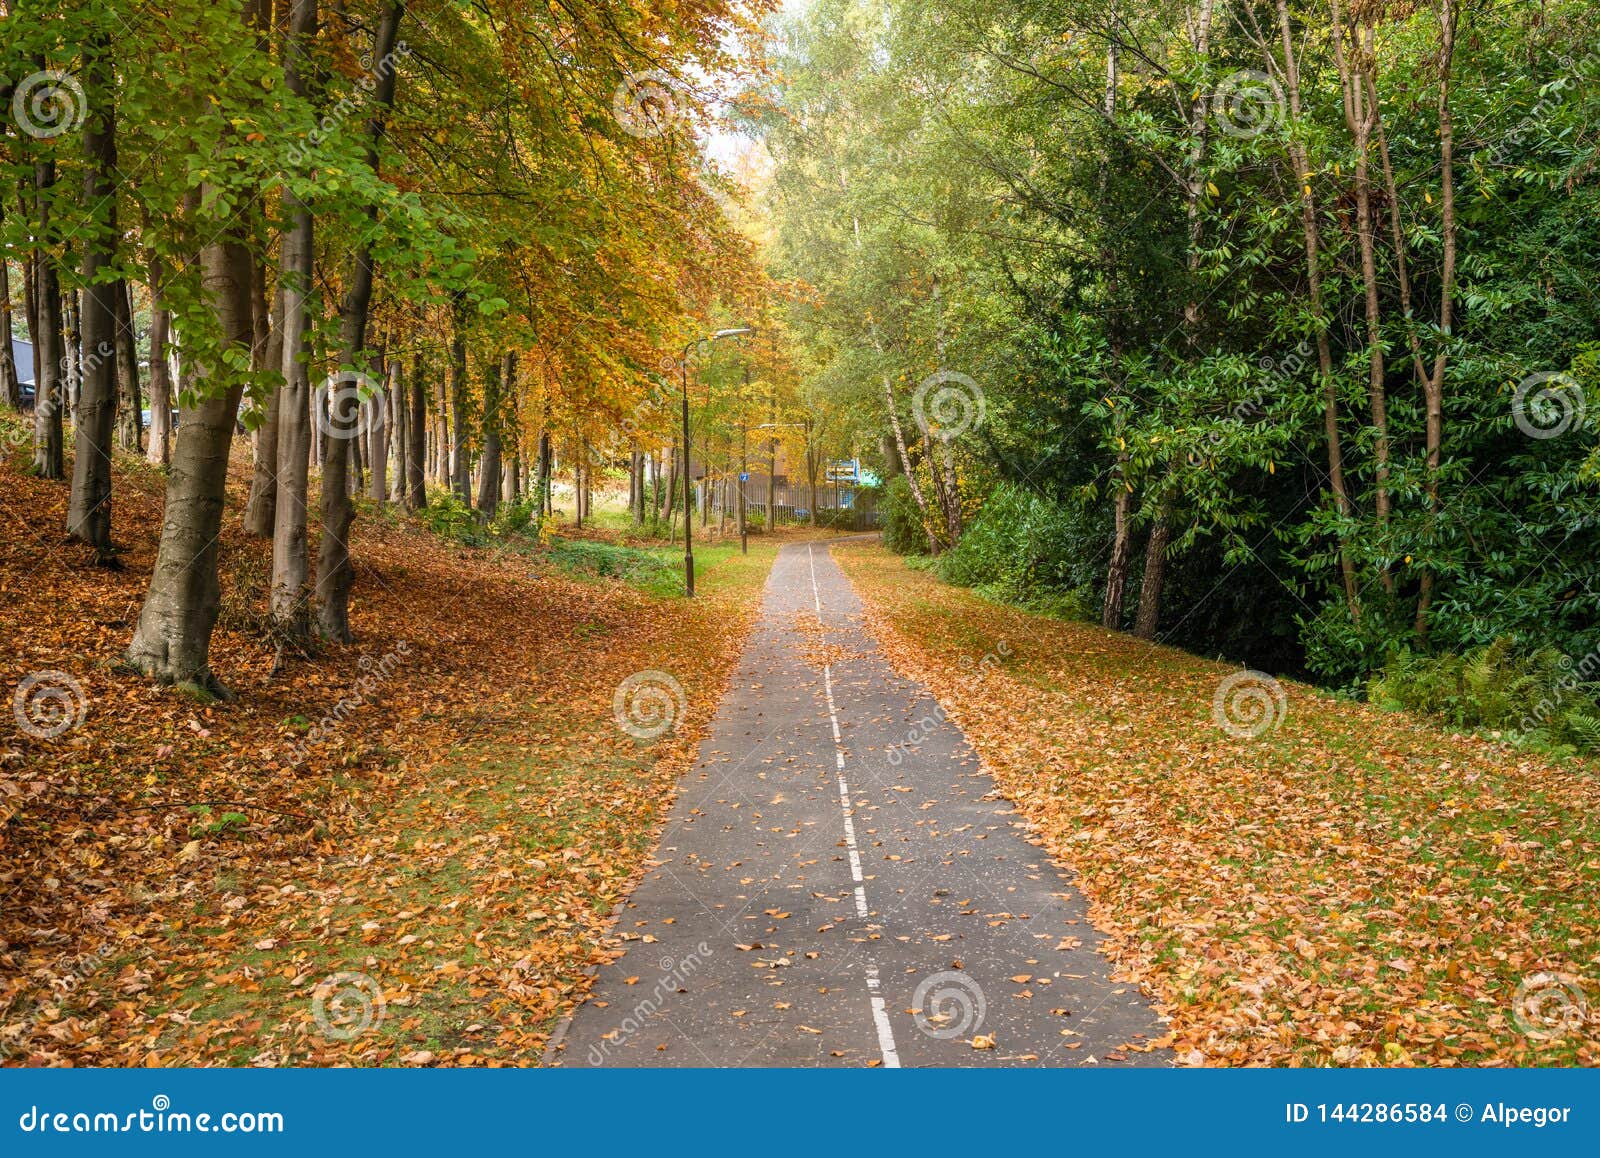 Empty Paved Path Partly Covered in Leaves in Autumn Stock Photo - Image ...